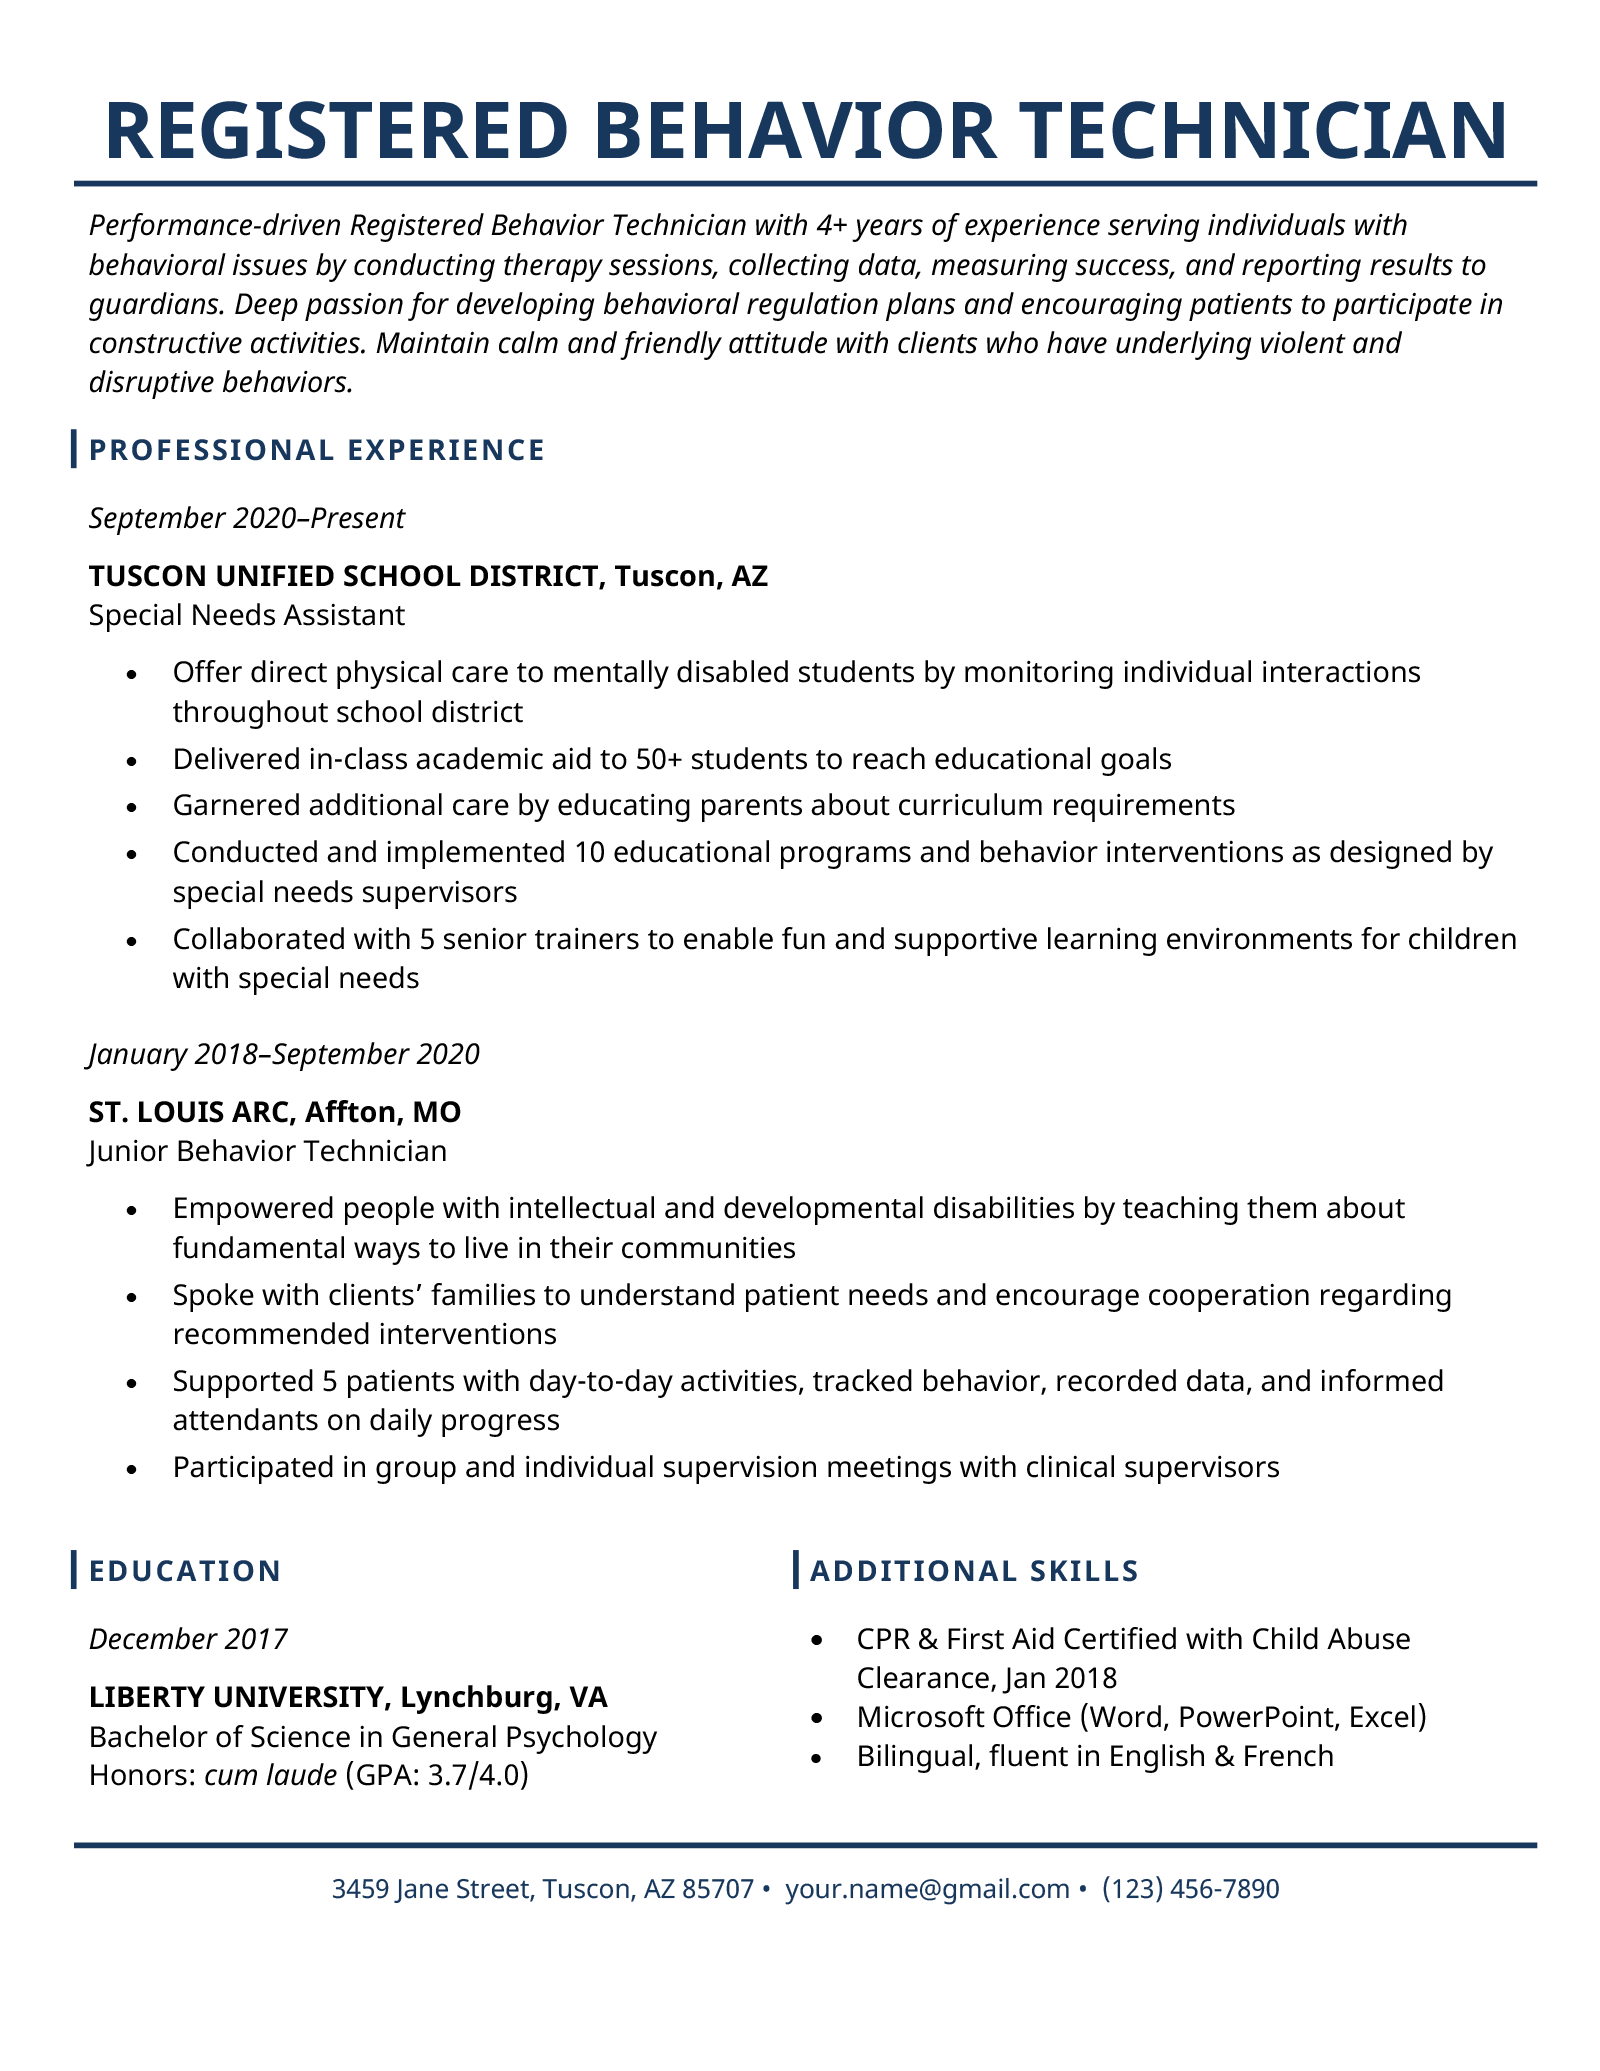 An RBT resume example